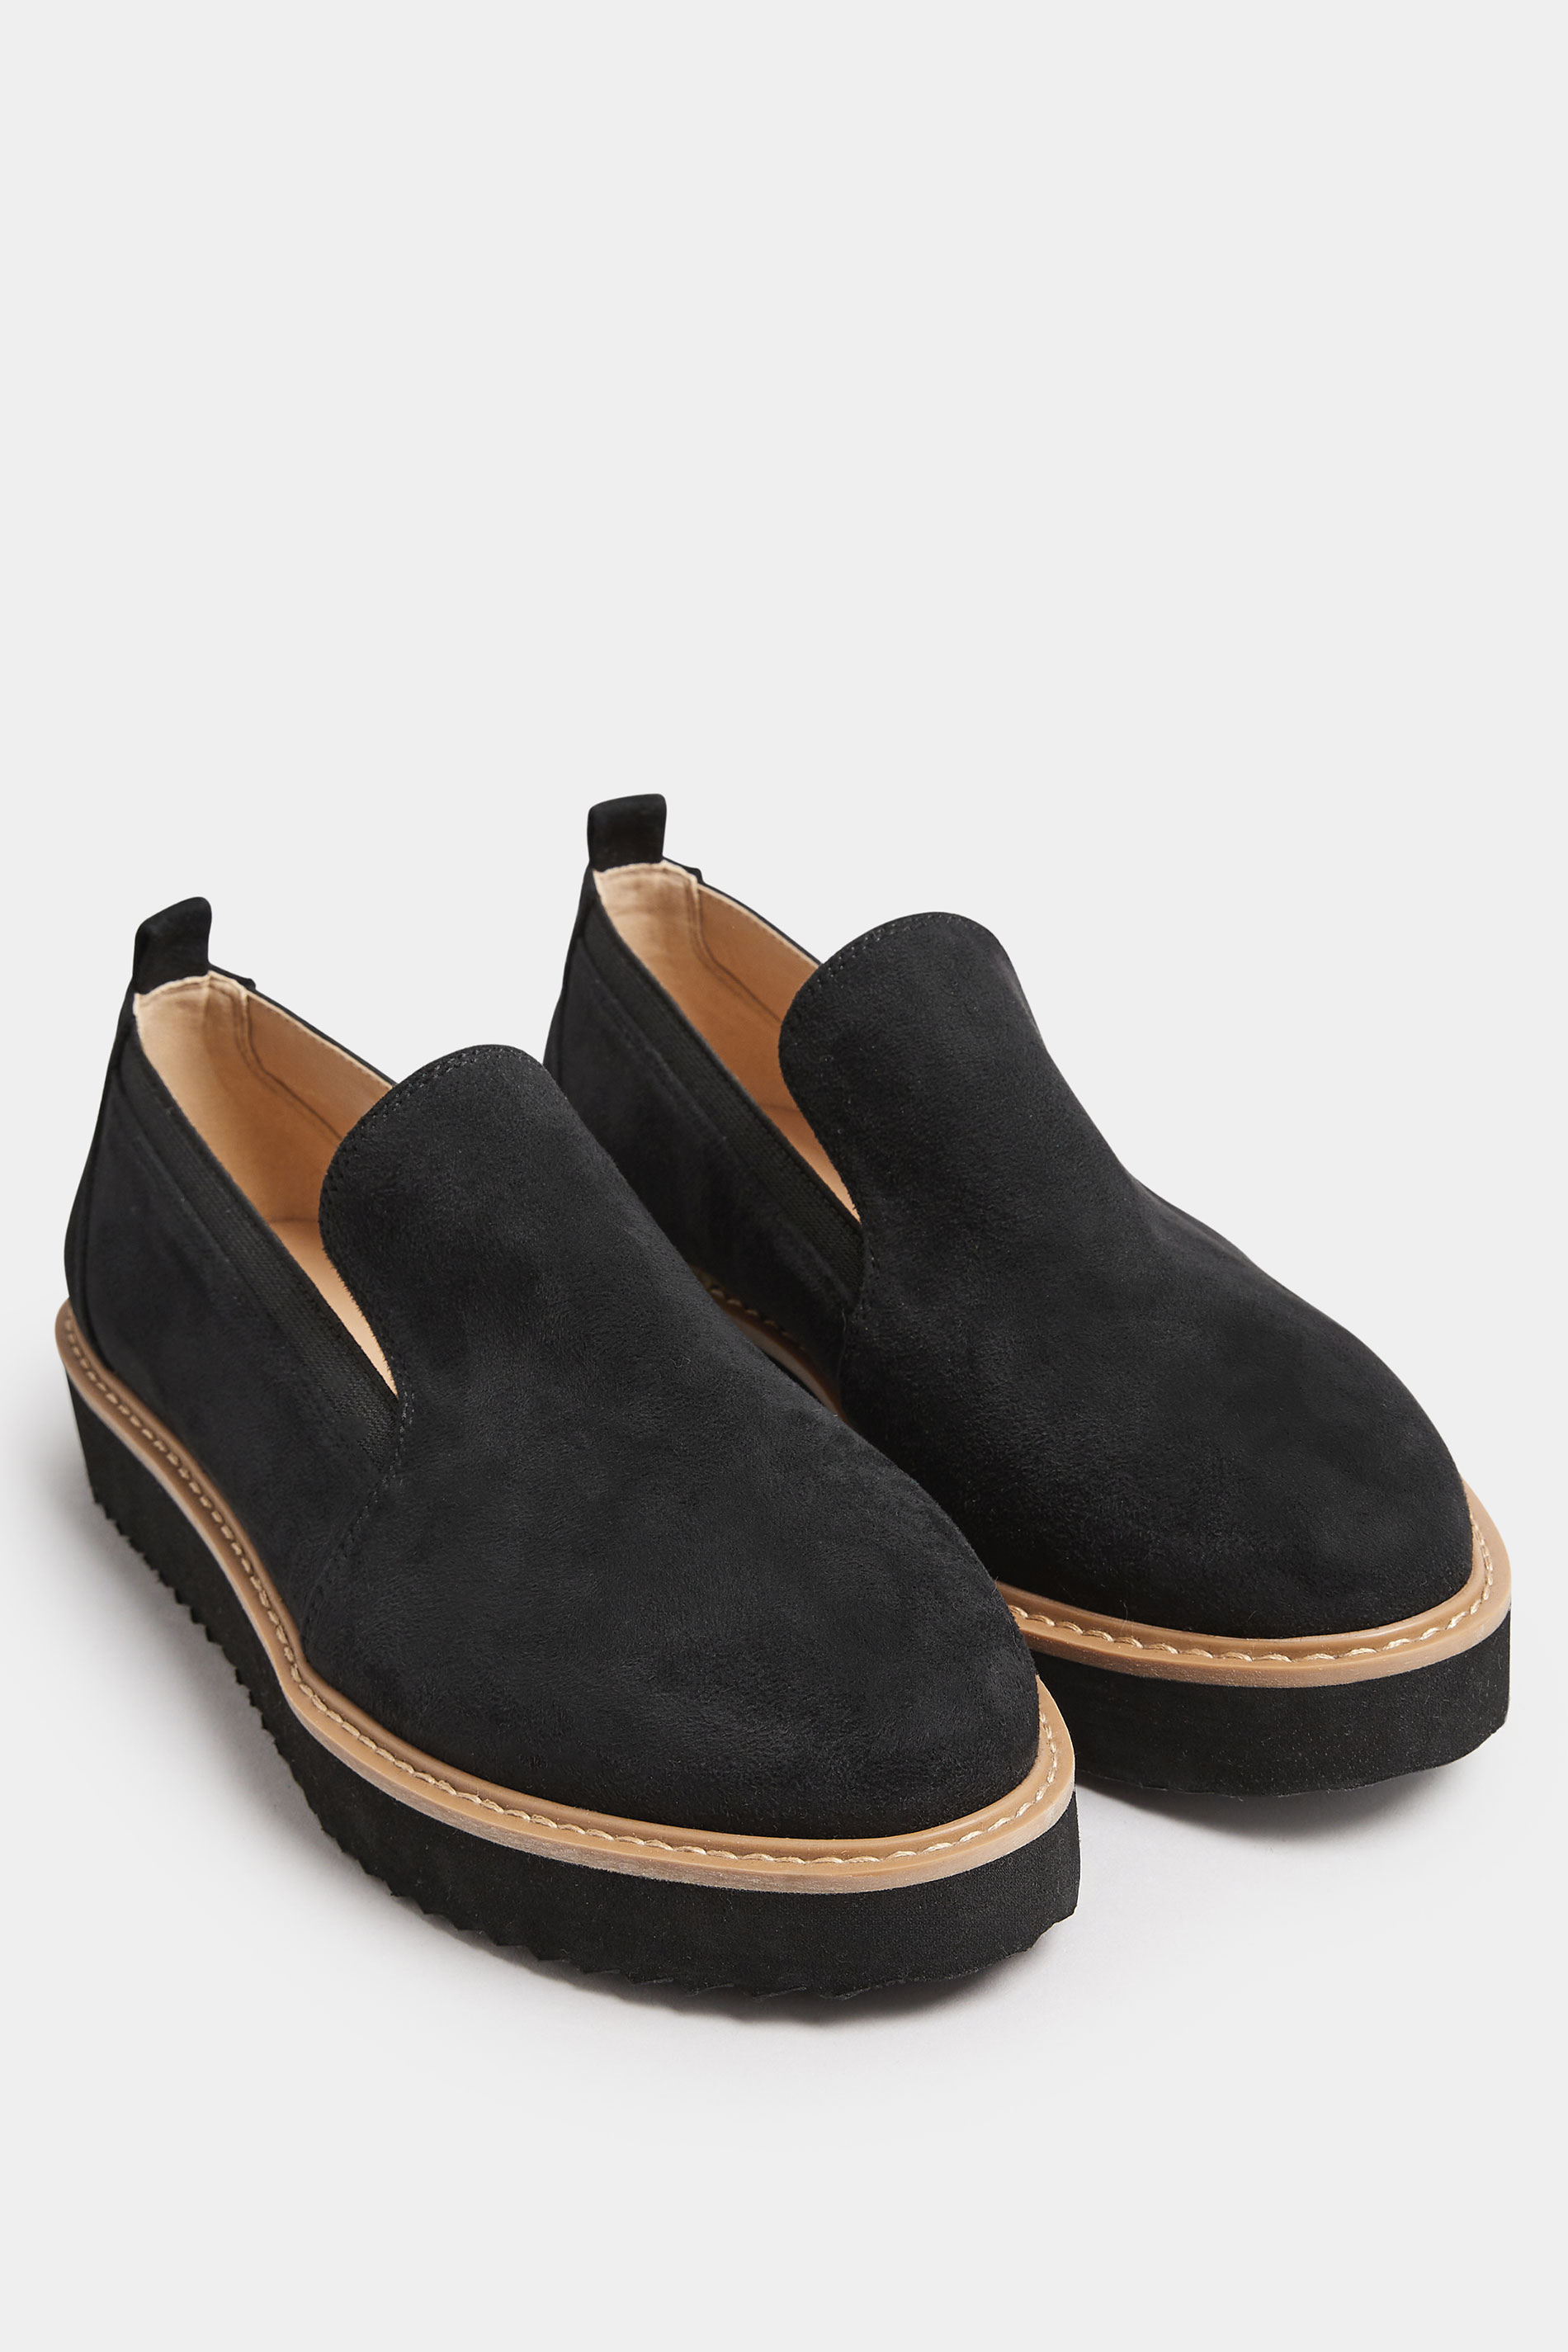 Black Faux Suede Slip On Loafers In Extra Wide EEE Fit | Yours Clothing 2